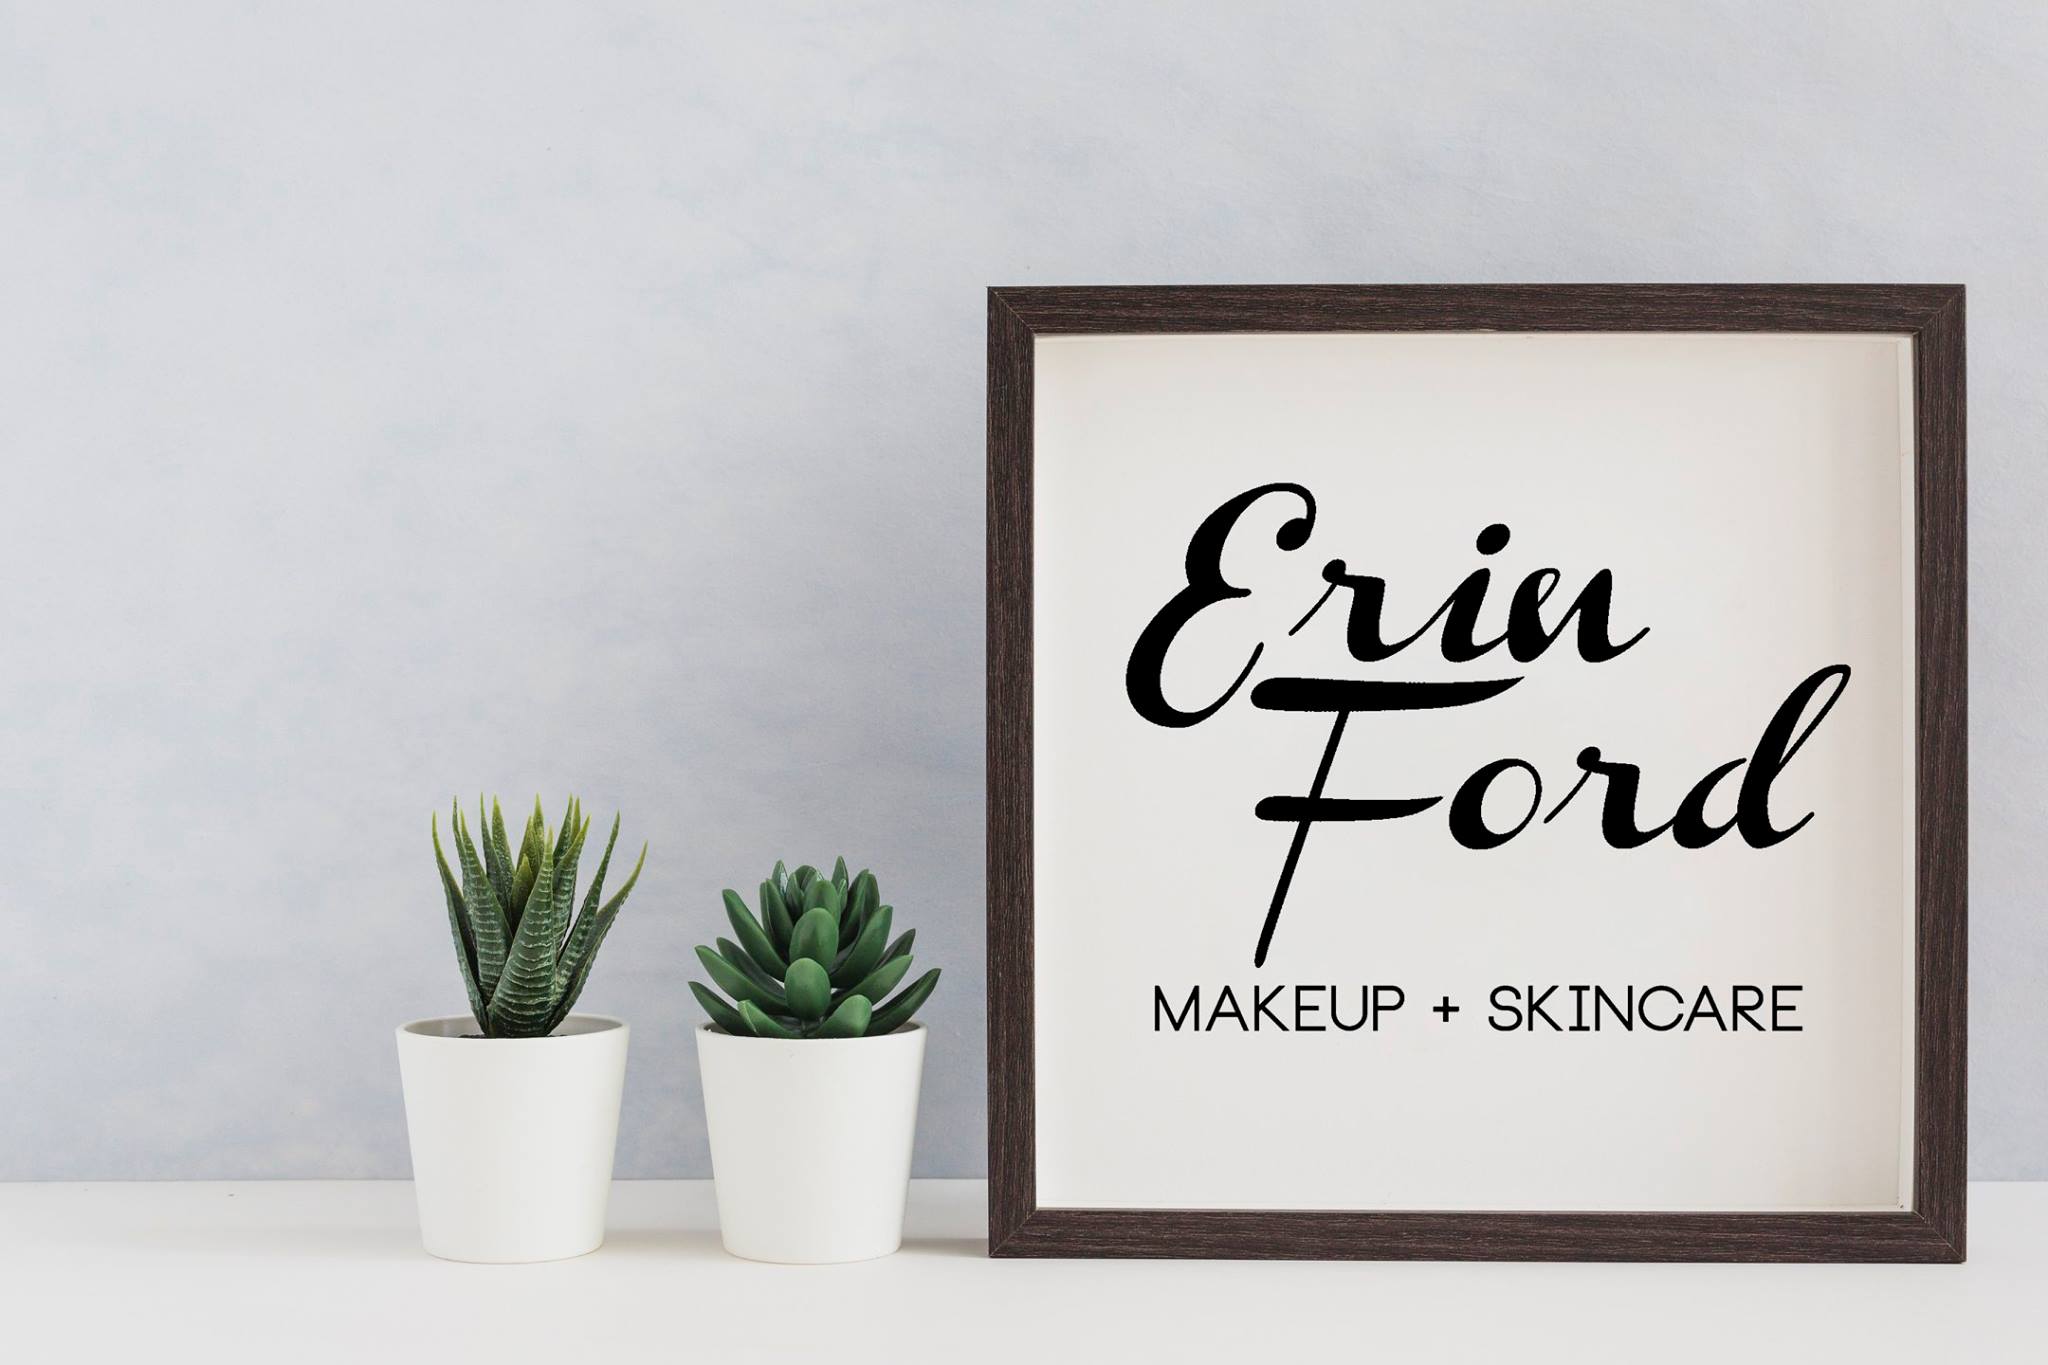 Erin Ford Makeup + Skincare 440 3rd Ave, Watervliet New York 12189